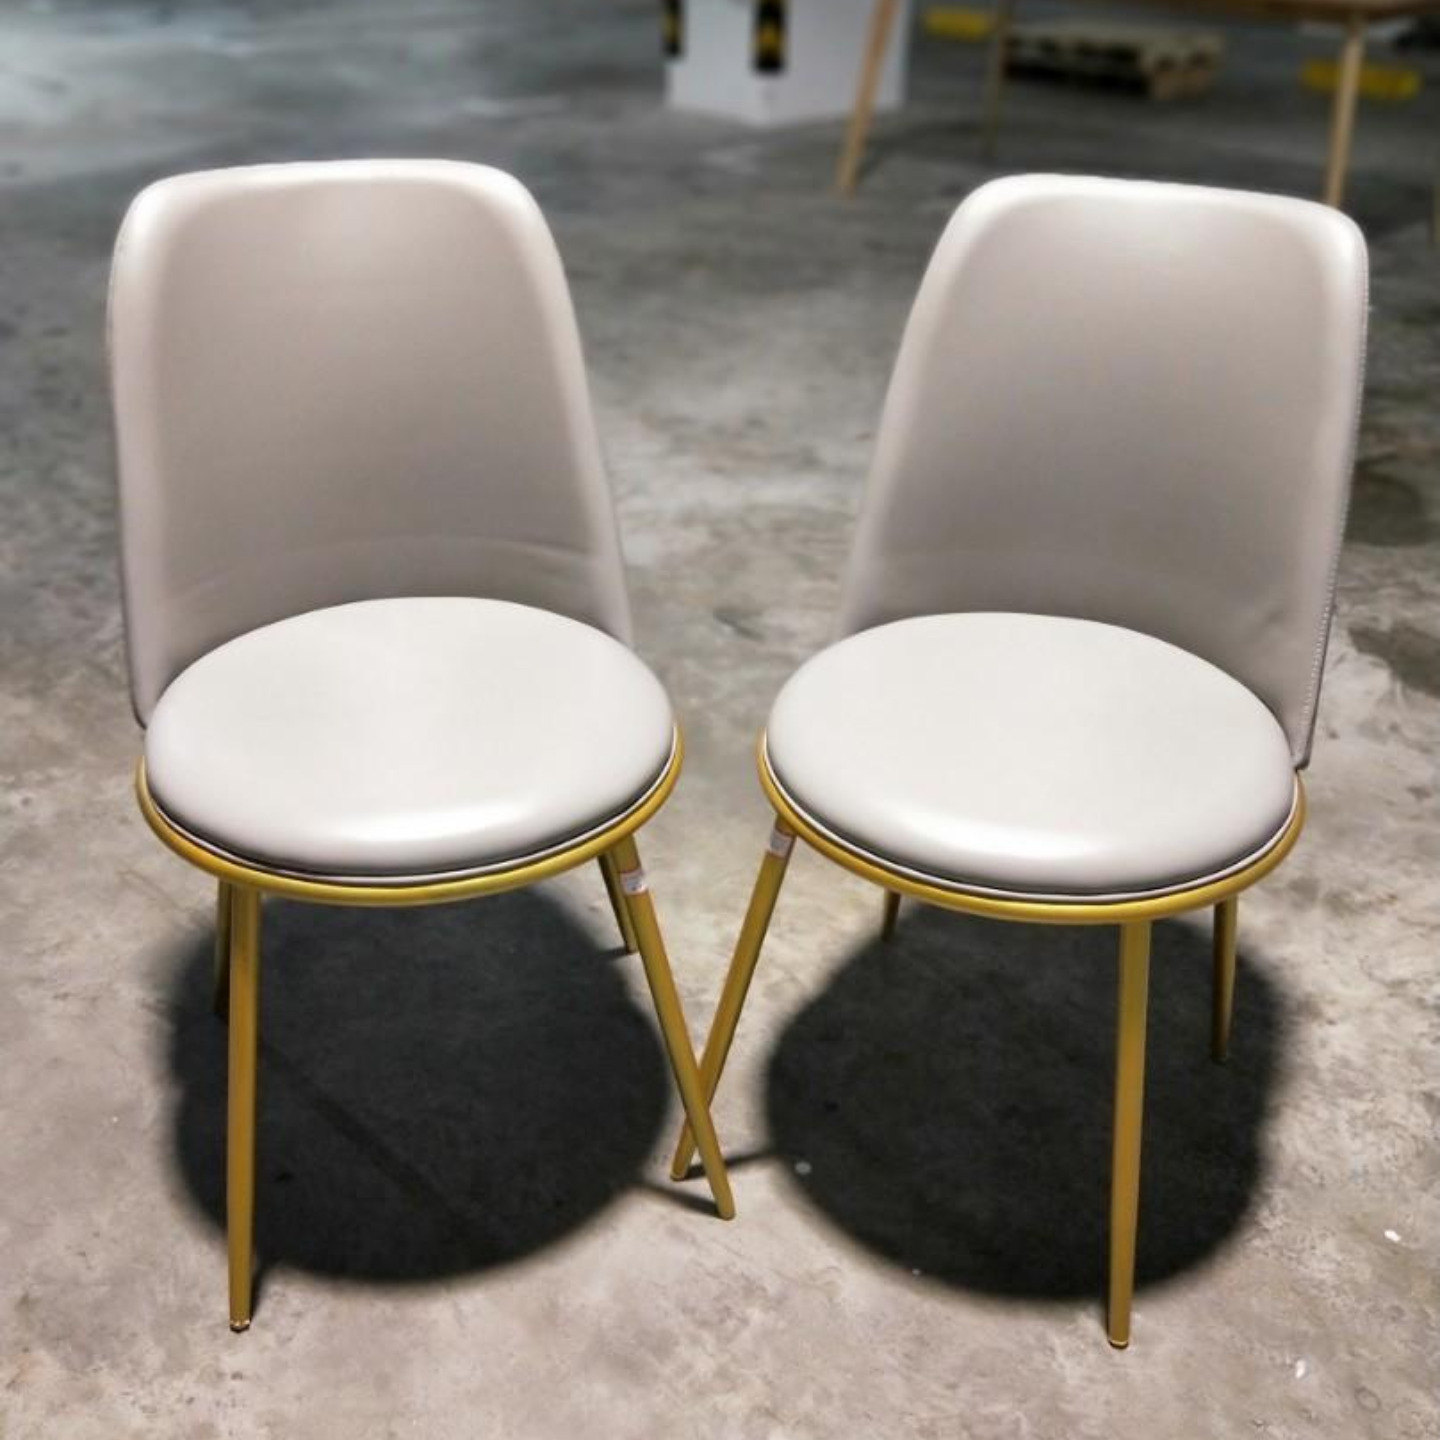 PAIR OF EVIE Dining Chair in GREY PU with GOLD FRAME